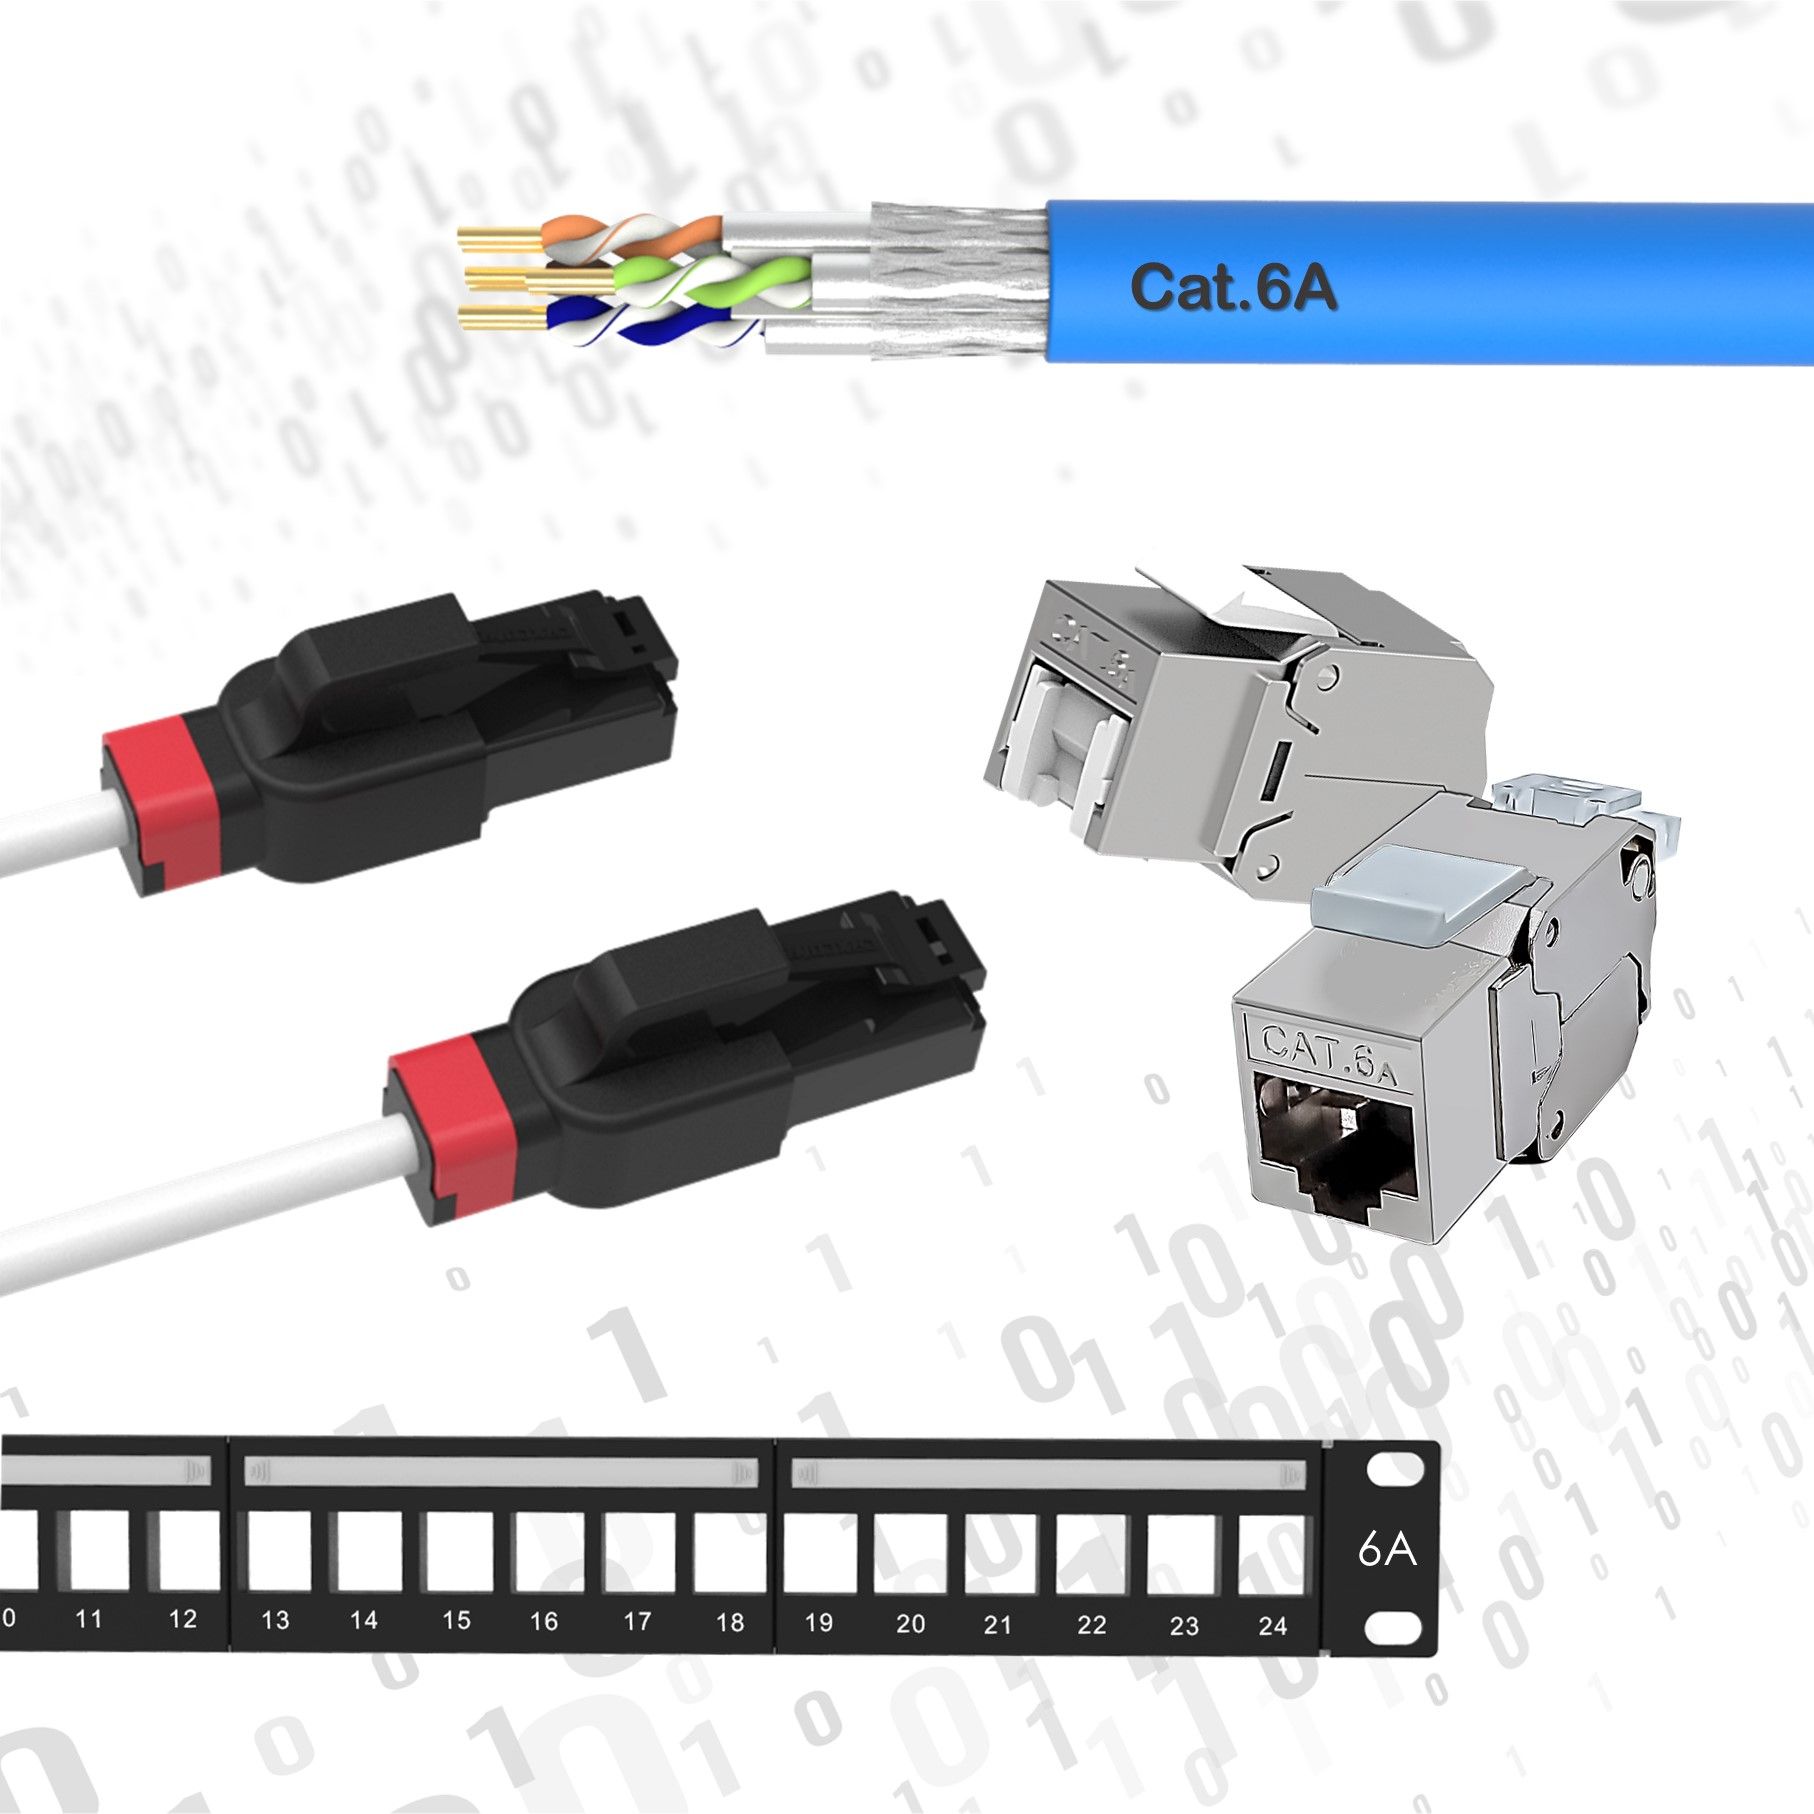 Cat6A Structured Cabling Channel Solution Cat6A